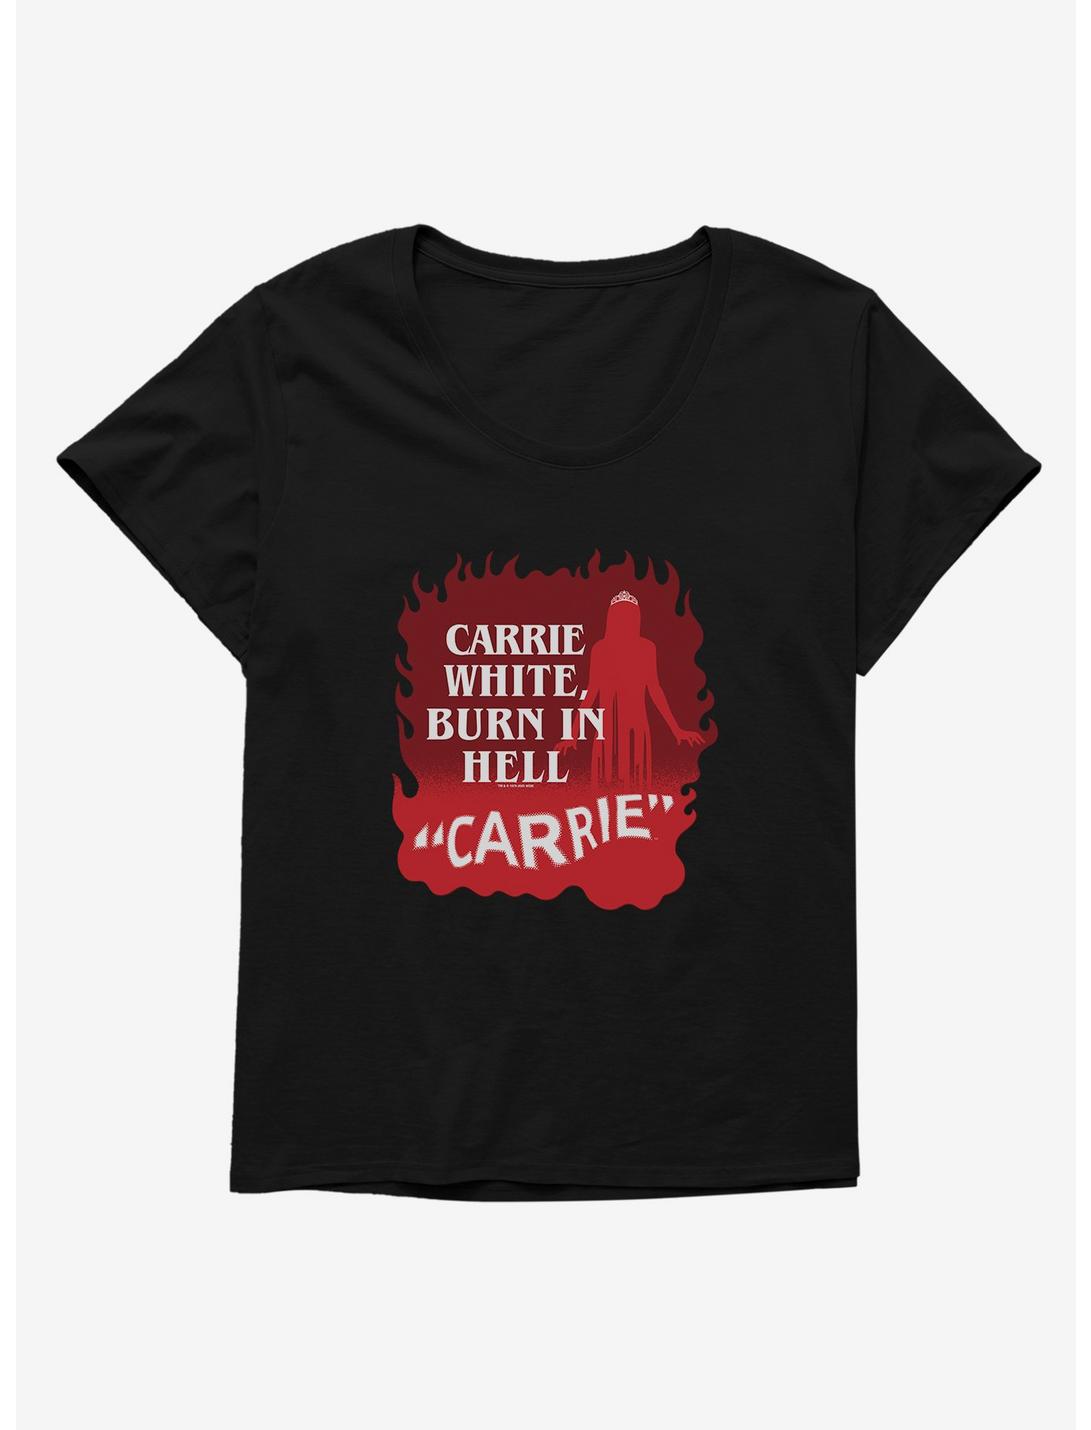 Carrie 1976 Burn in Hell Womens T-Shirt Plus Size, BLACK, hi-res